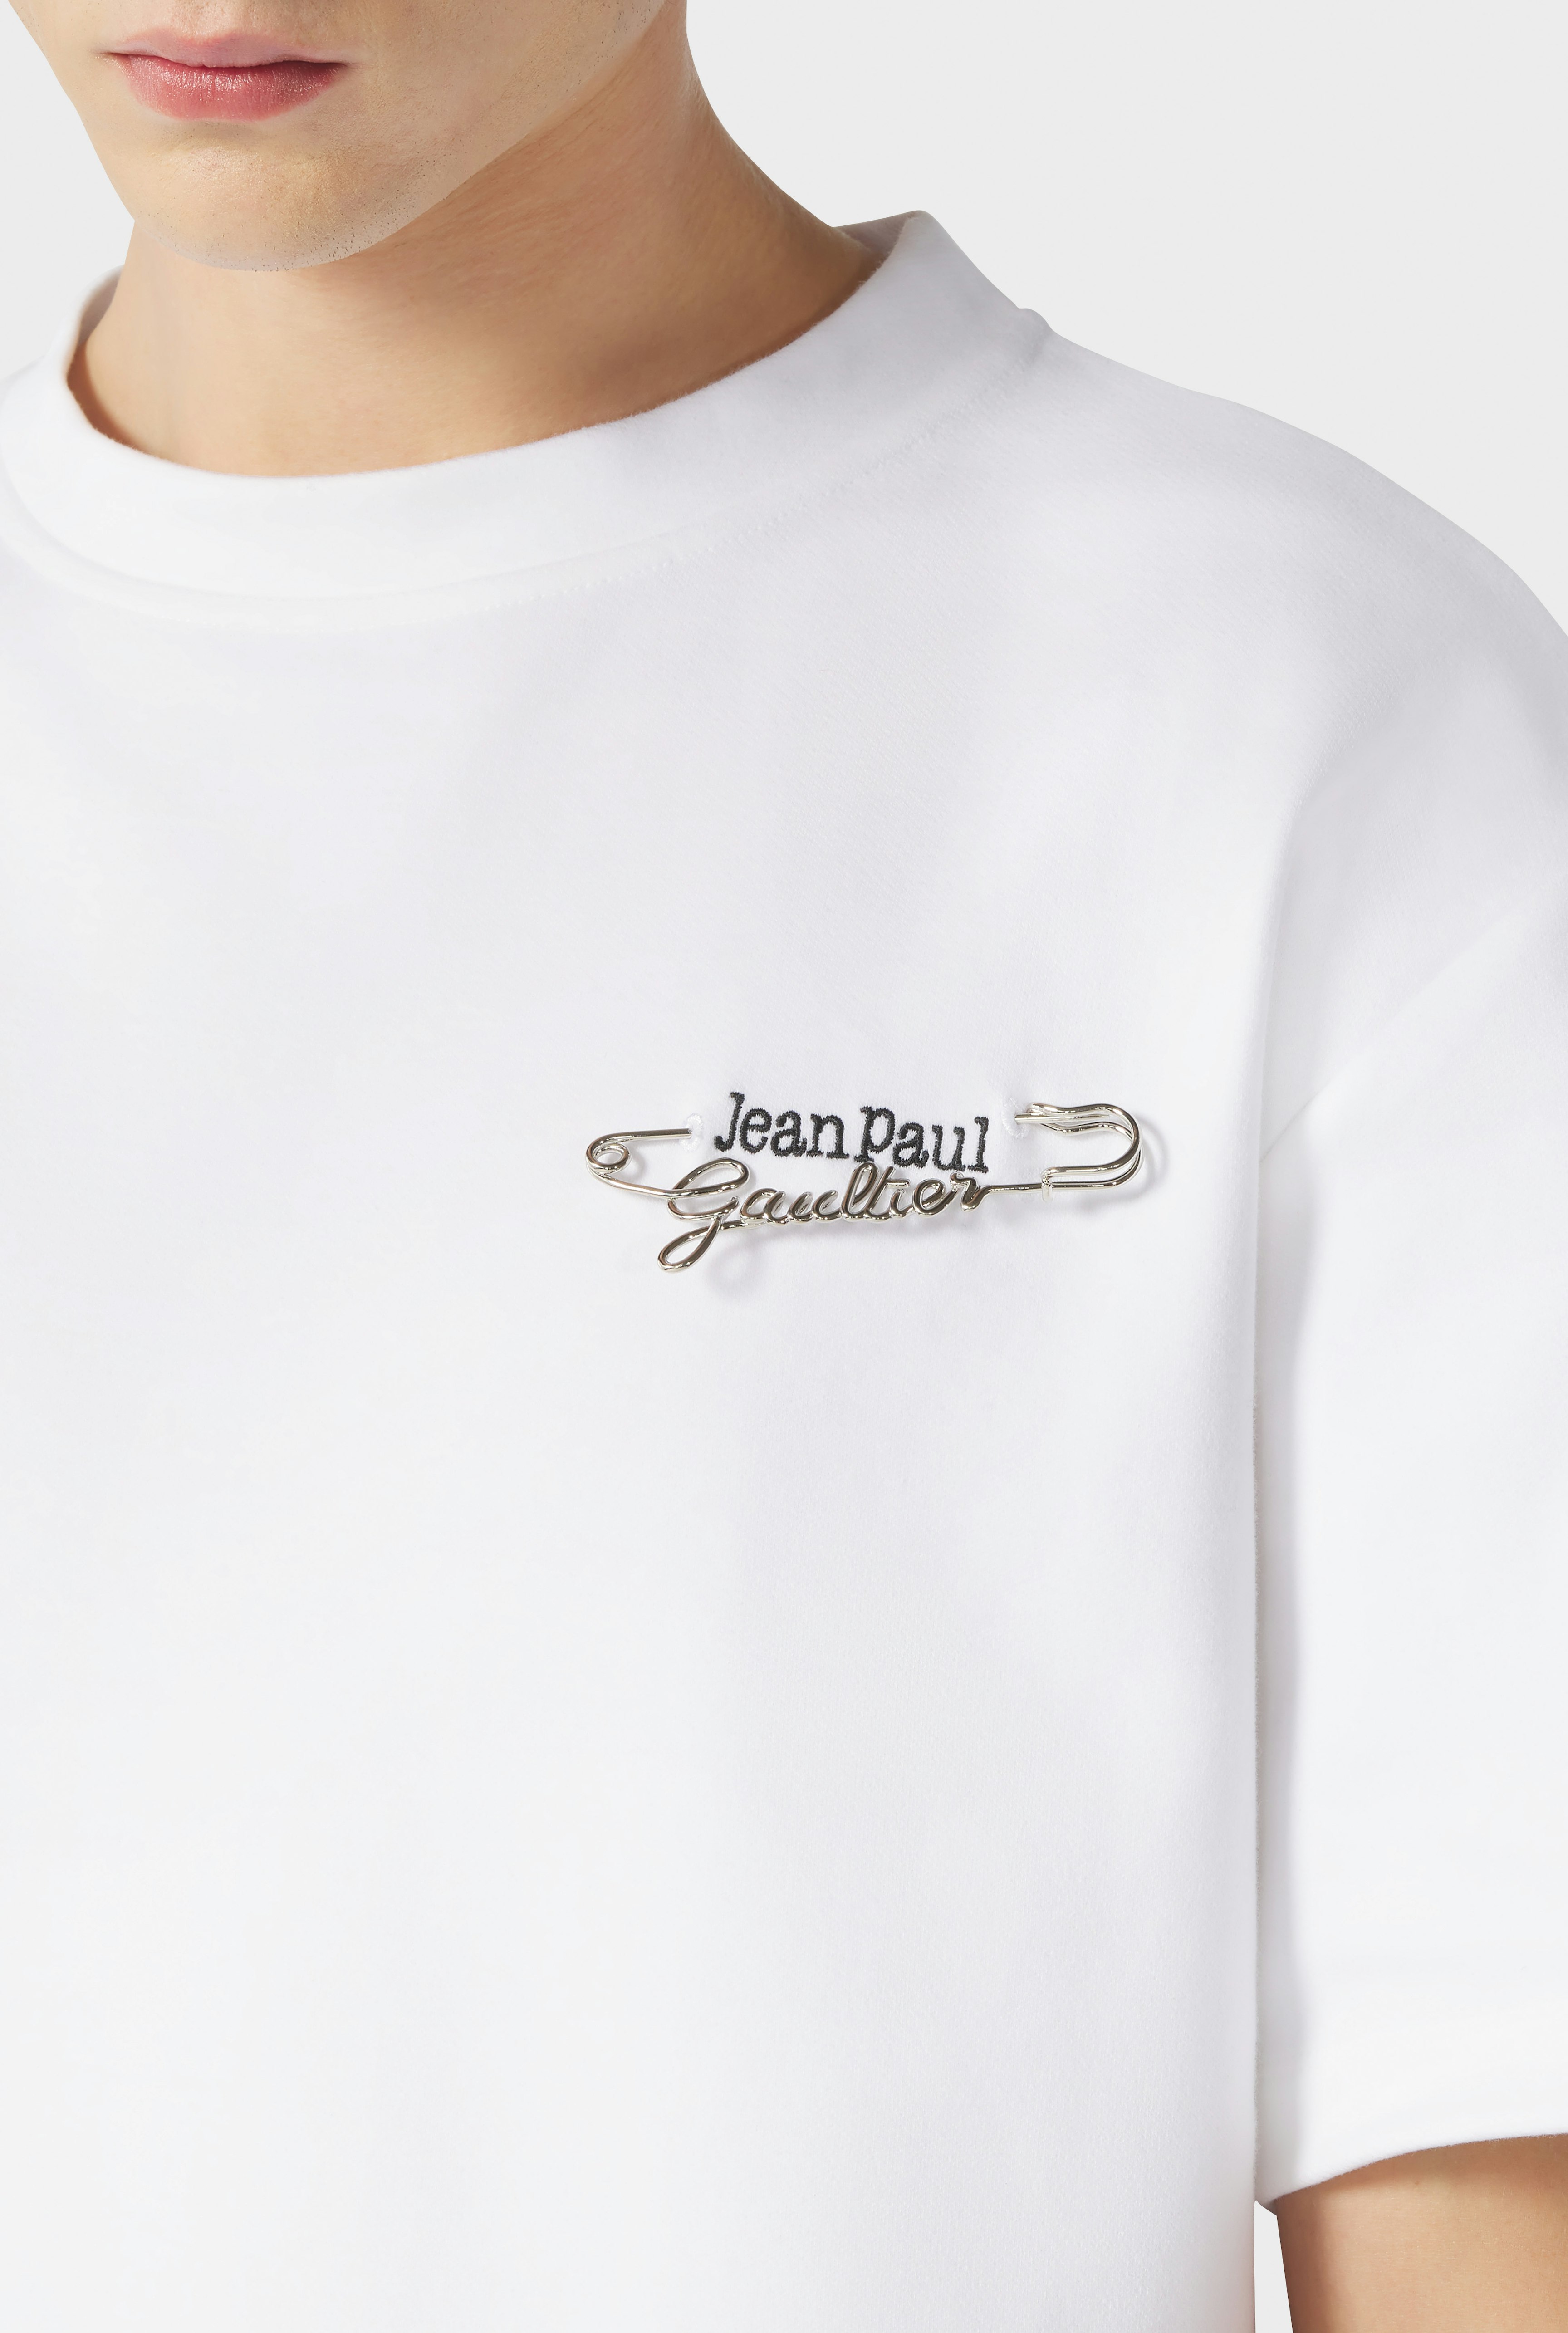 The White Brooch T-Shirt